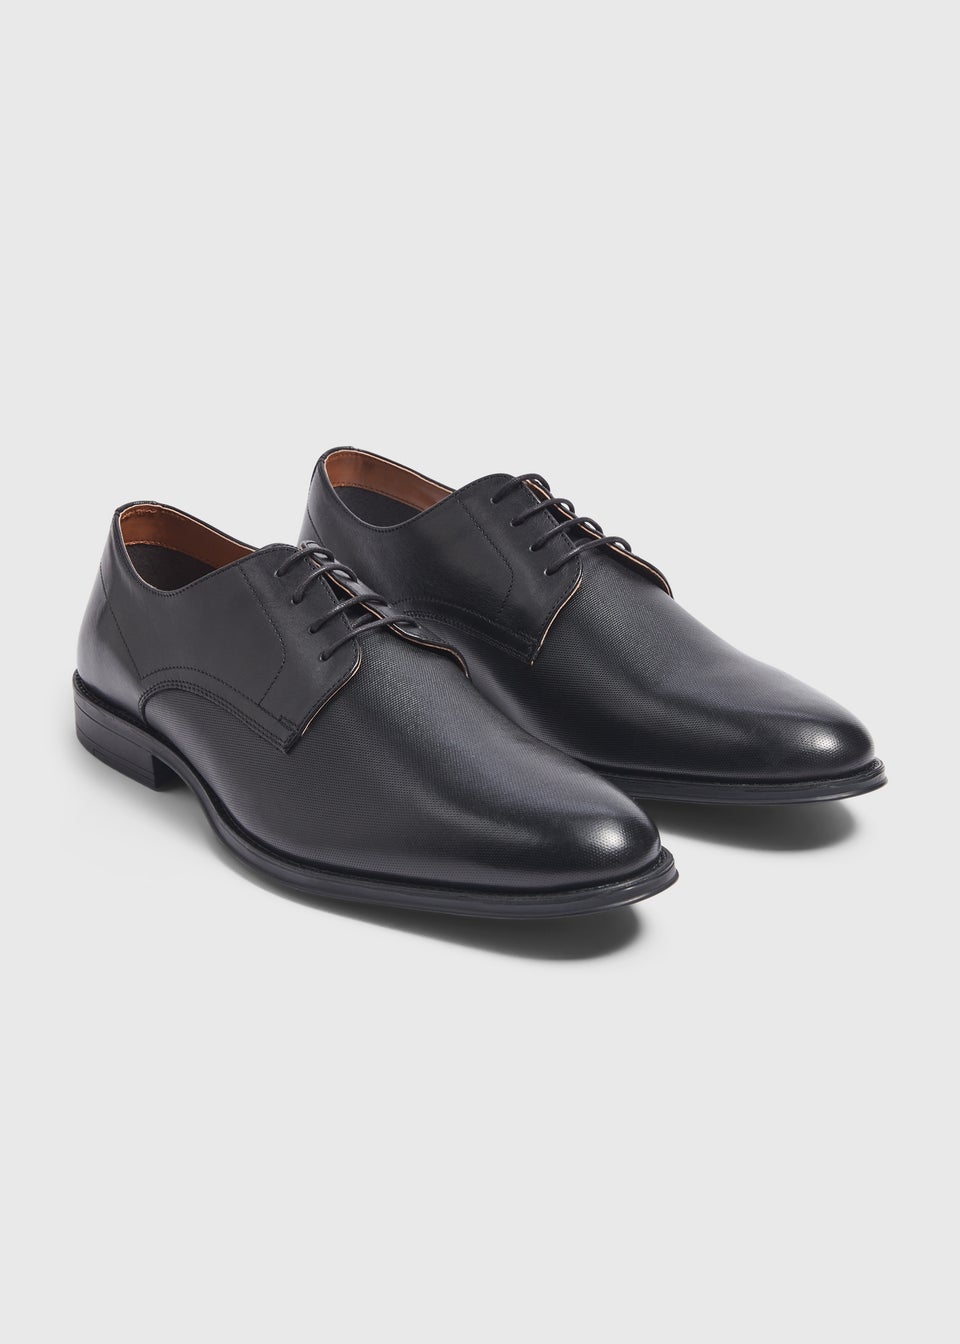 Taylor & Wright Black Leather Derby Shoes